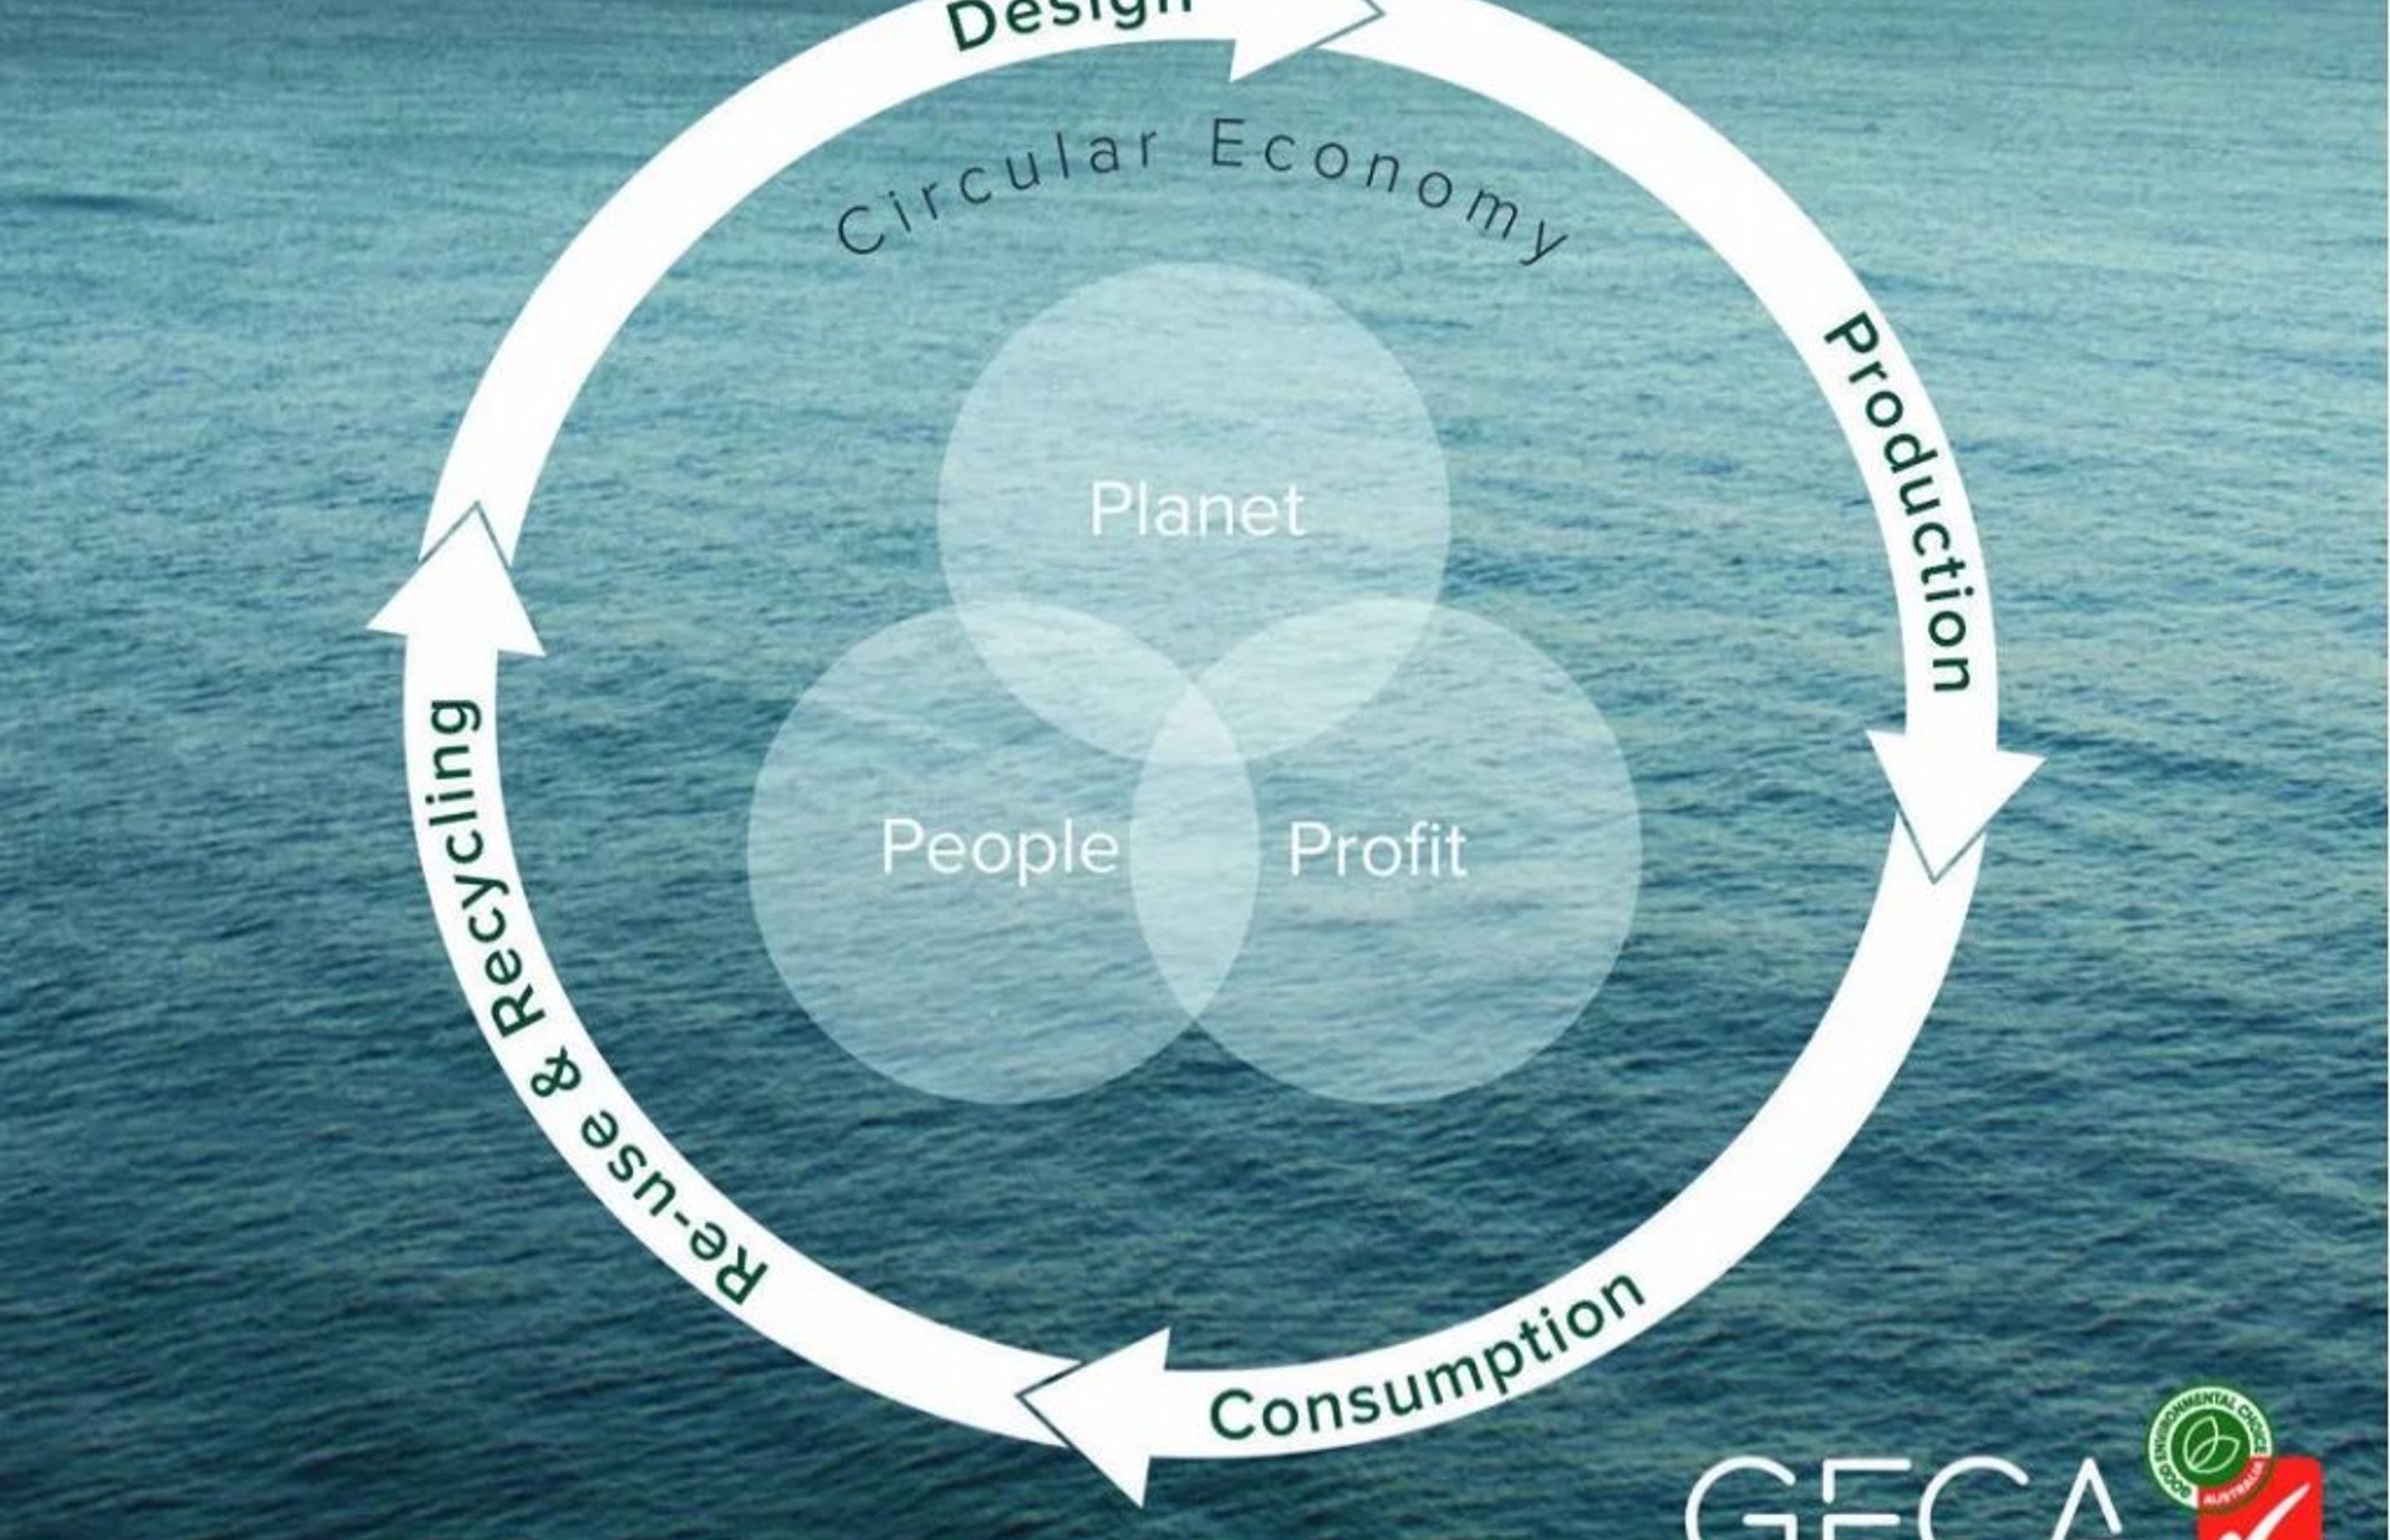 How to Make a Better Flooring Choice for People and Planet with GECA